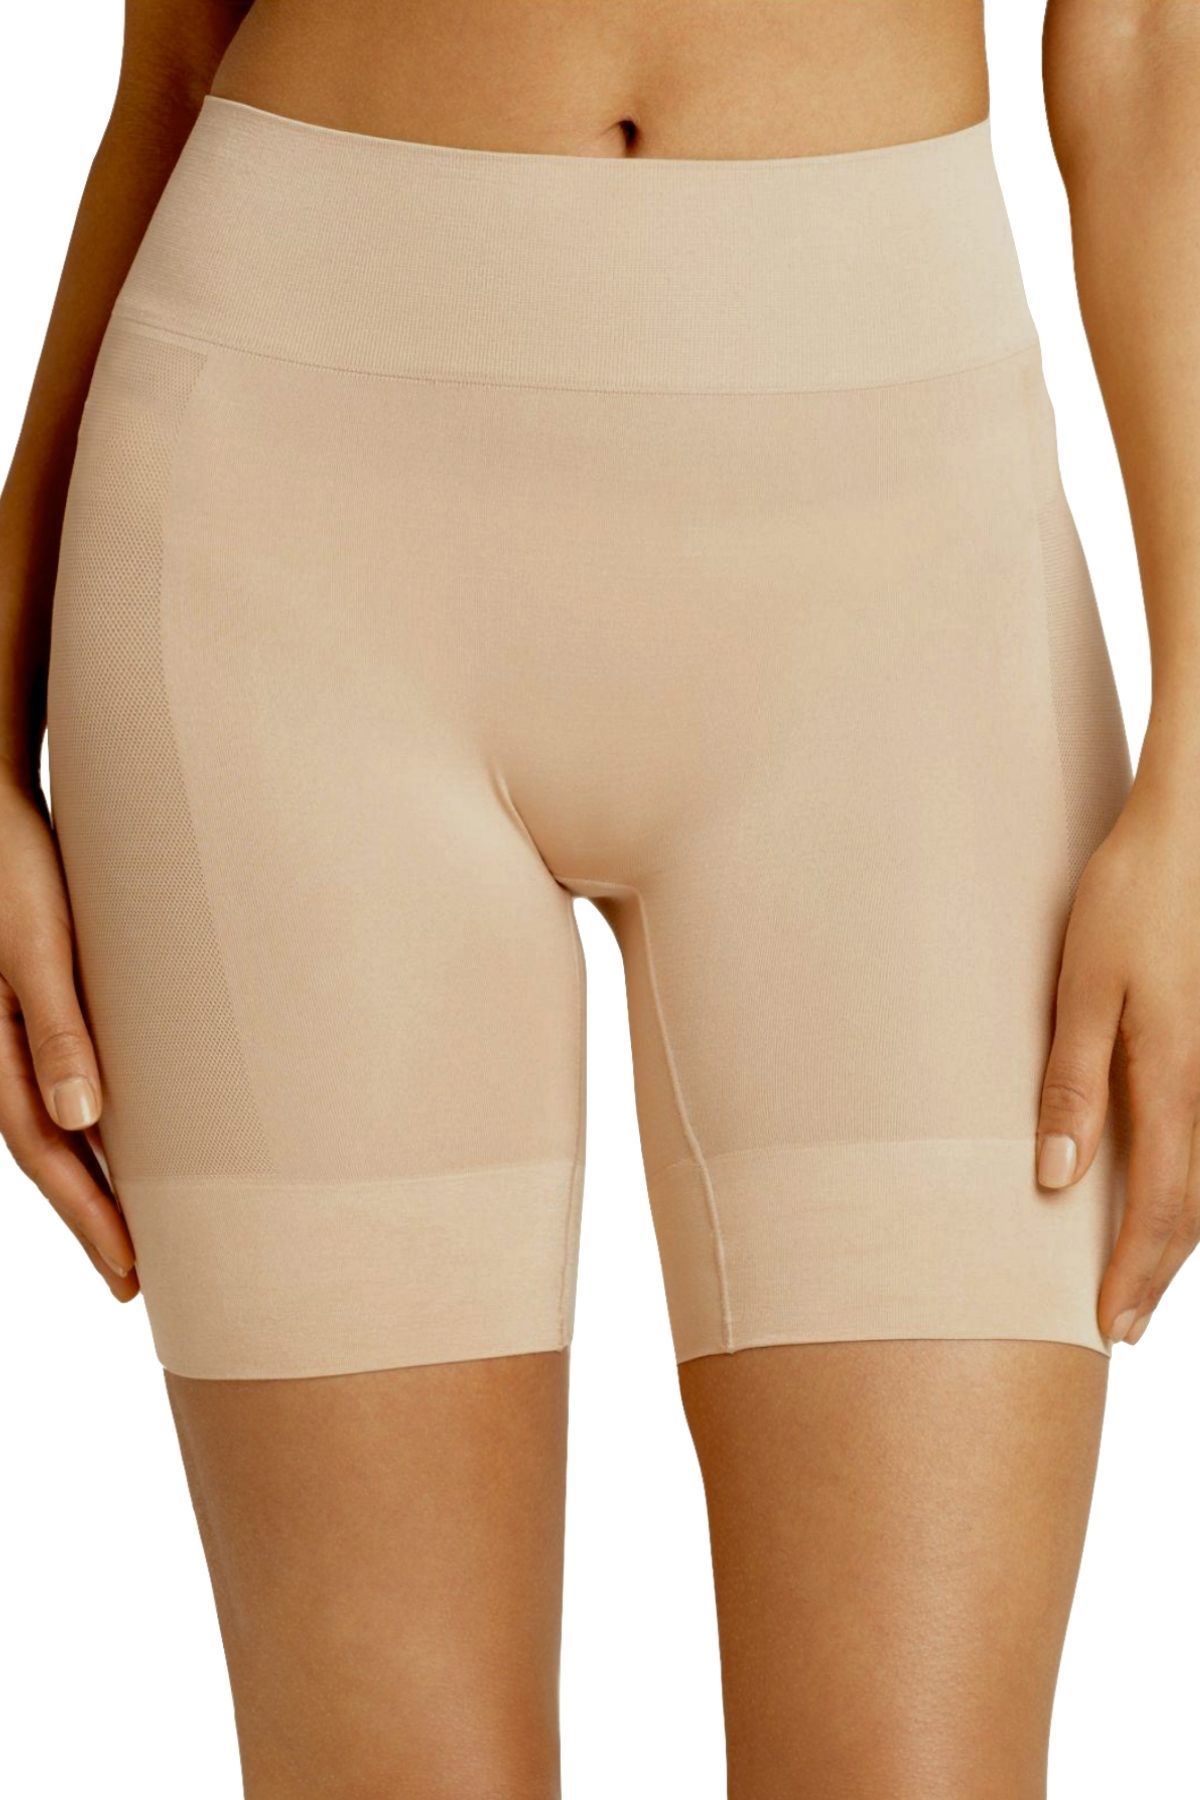 Smooth and Comfortable Skimmies Slipshorts